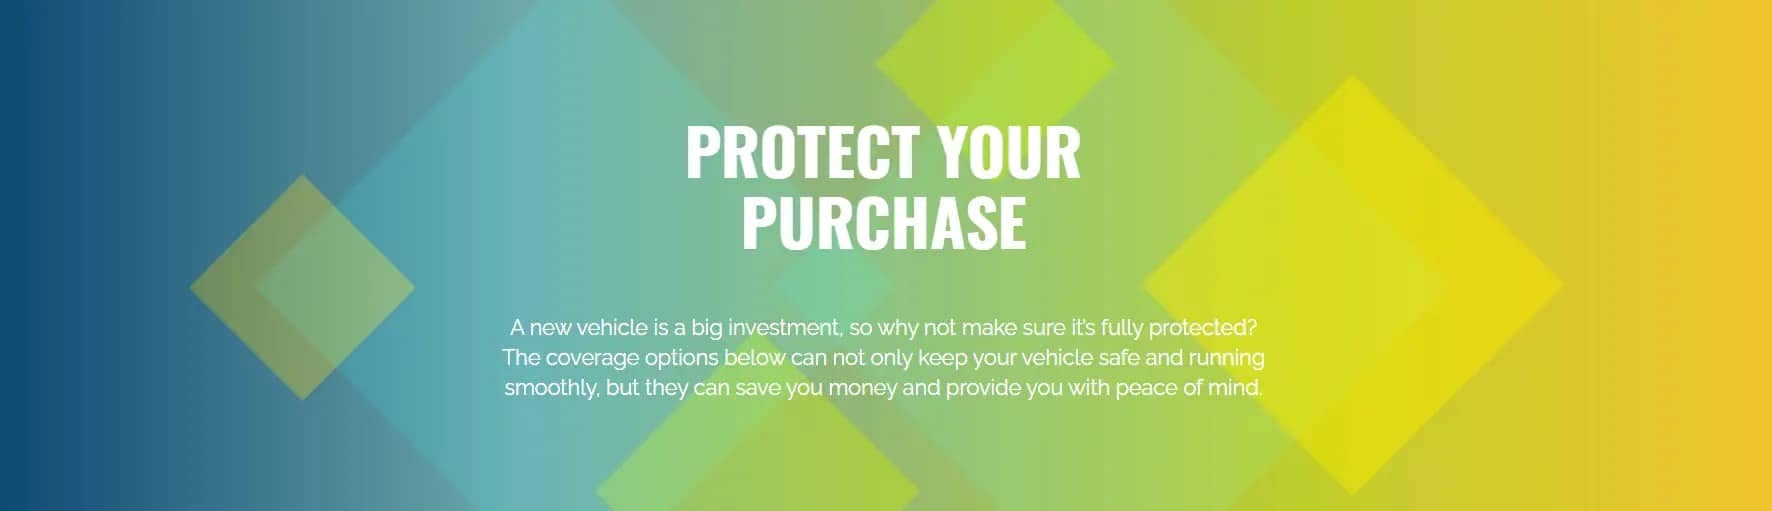 Protect Your Purchase